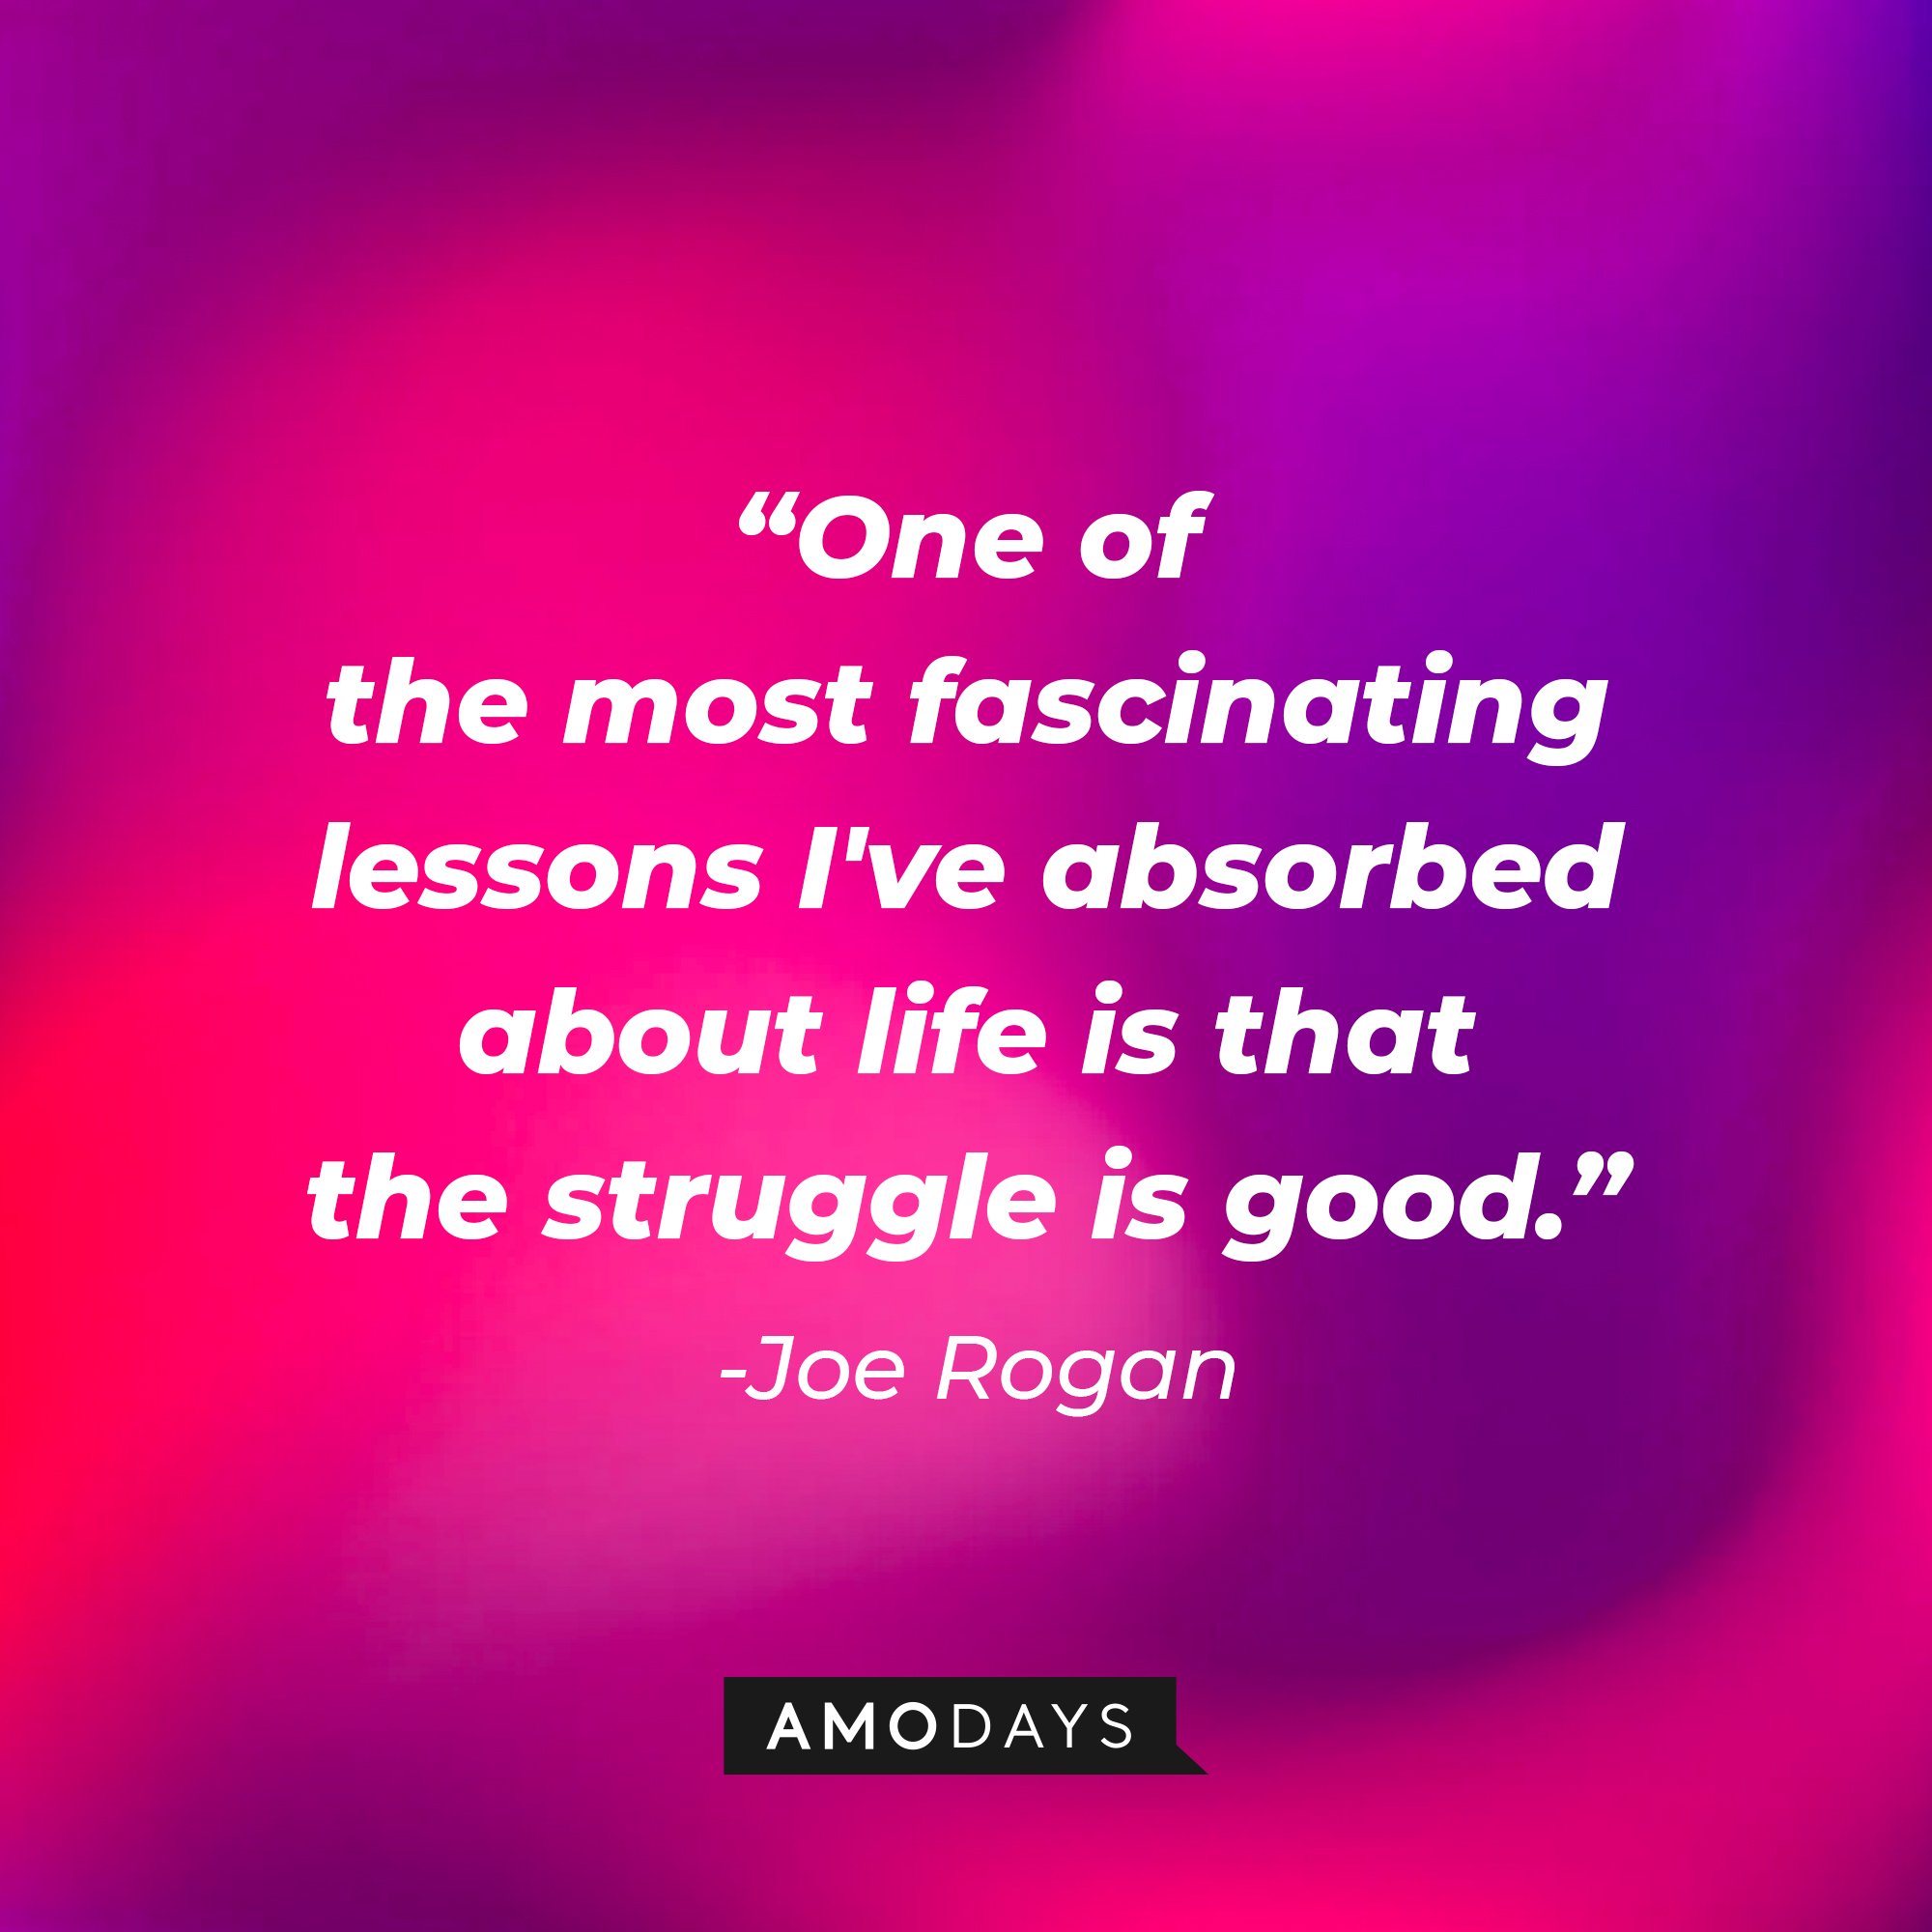 Joe Rogan's quote: "One of the most fascinating lessons I've absorbed about life is that the struggle is good." | Image: AmoDays